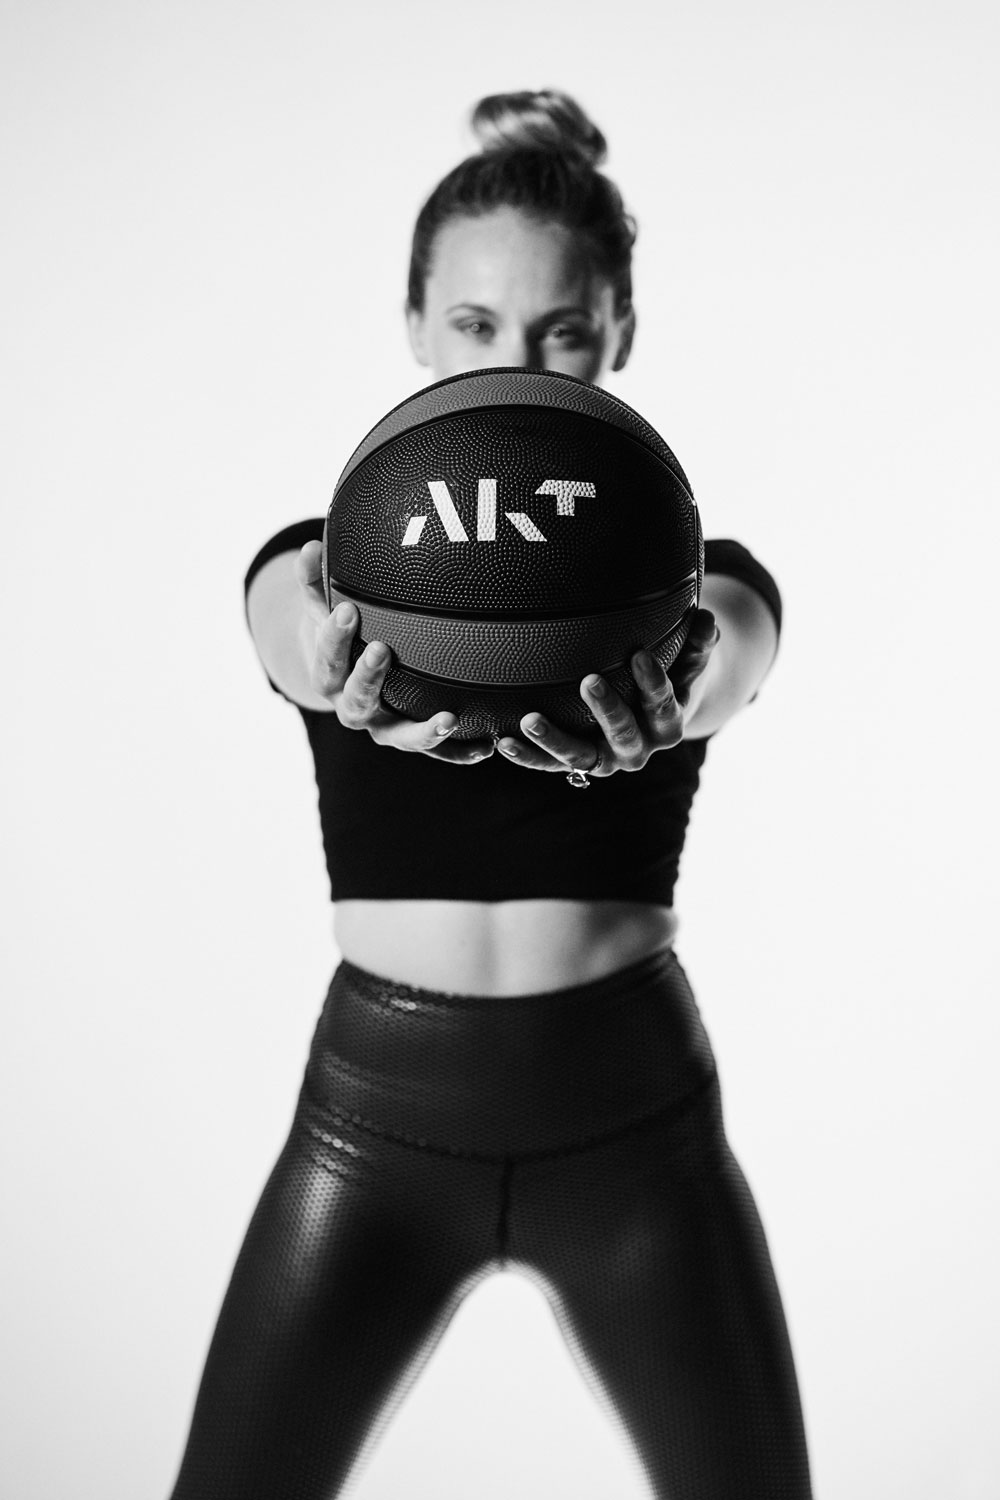 Person holding a medicine ball with AKT logo